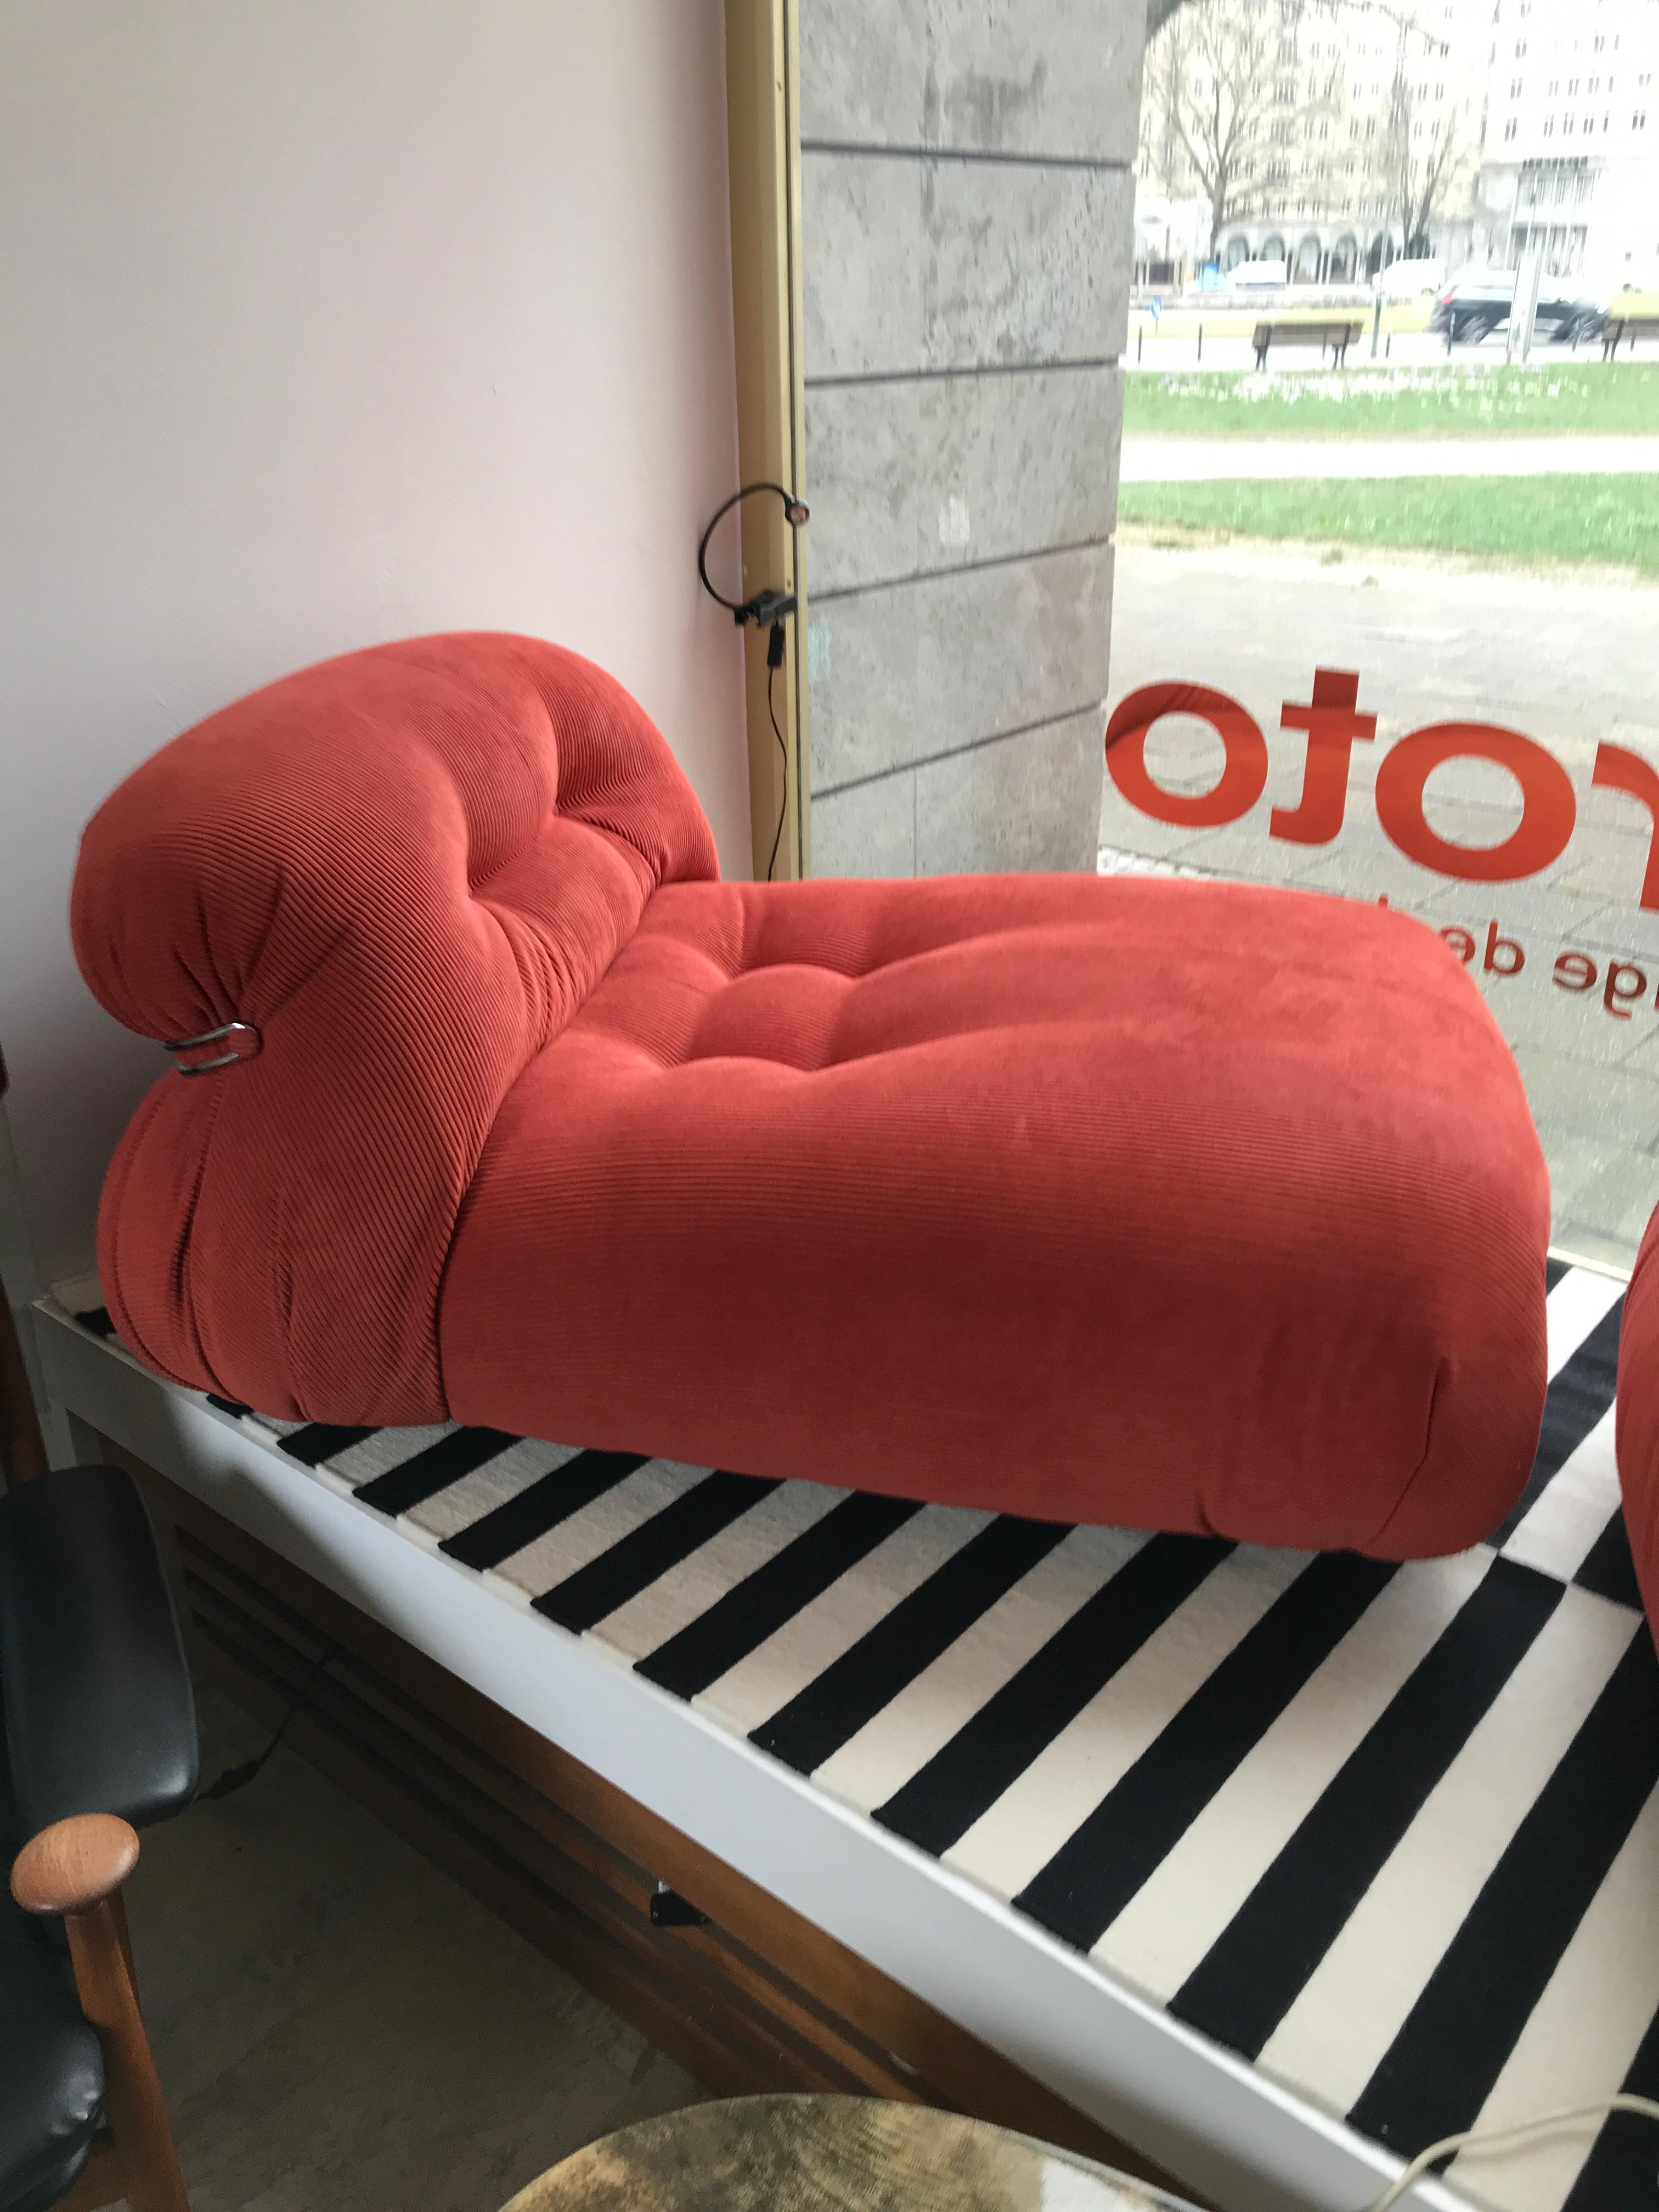 Afra & Tobia Scarpa 'Soriana' Chaise Lounge Chair with Ottoman in Red Corduroy For Sale 1